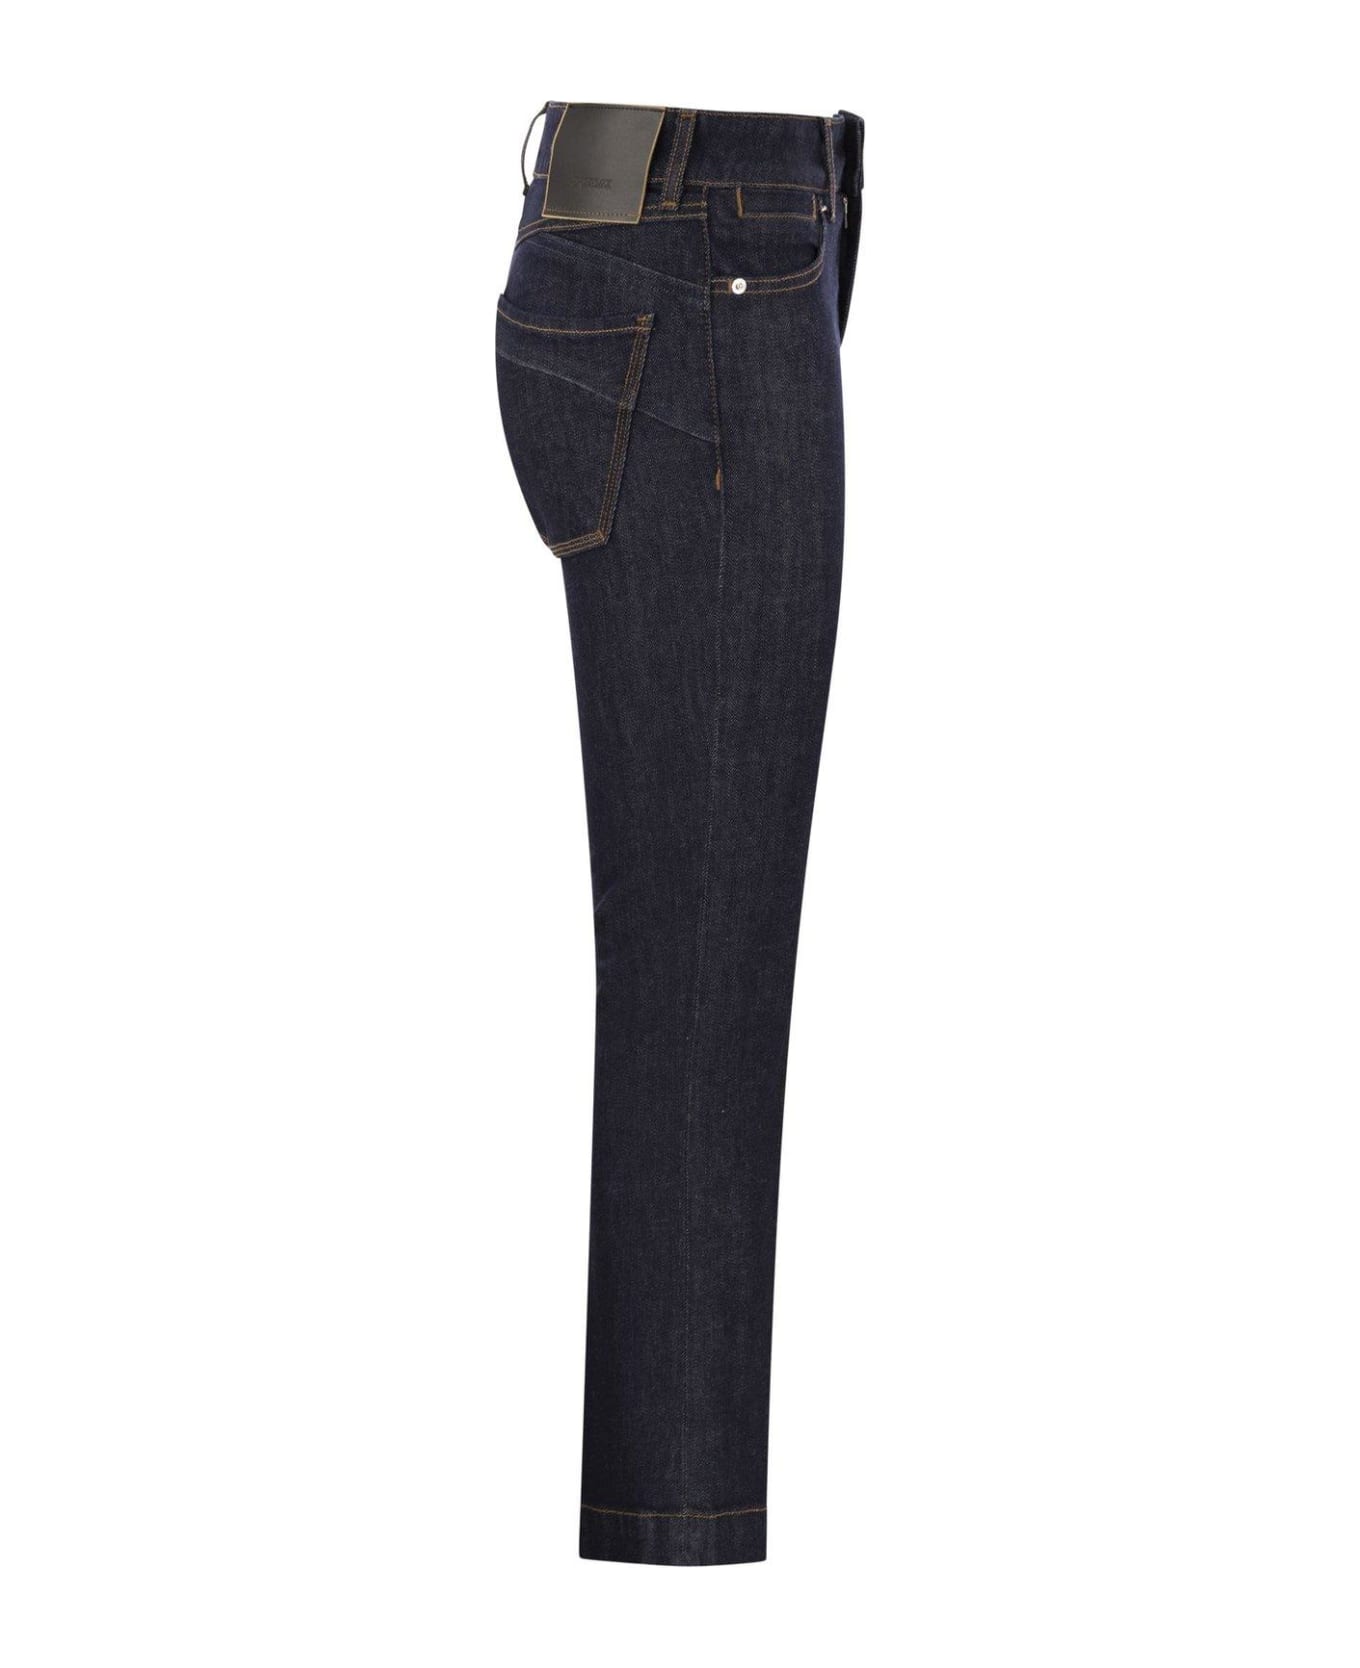 SportMax Flared Perfect-fit Jeans - NAVY